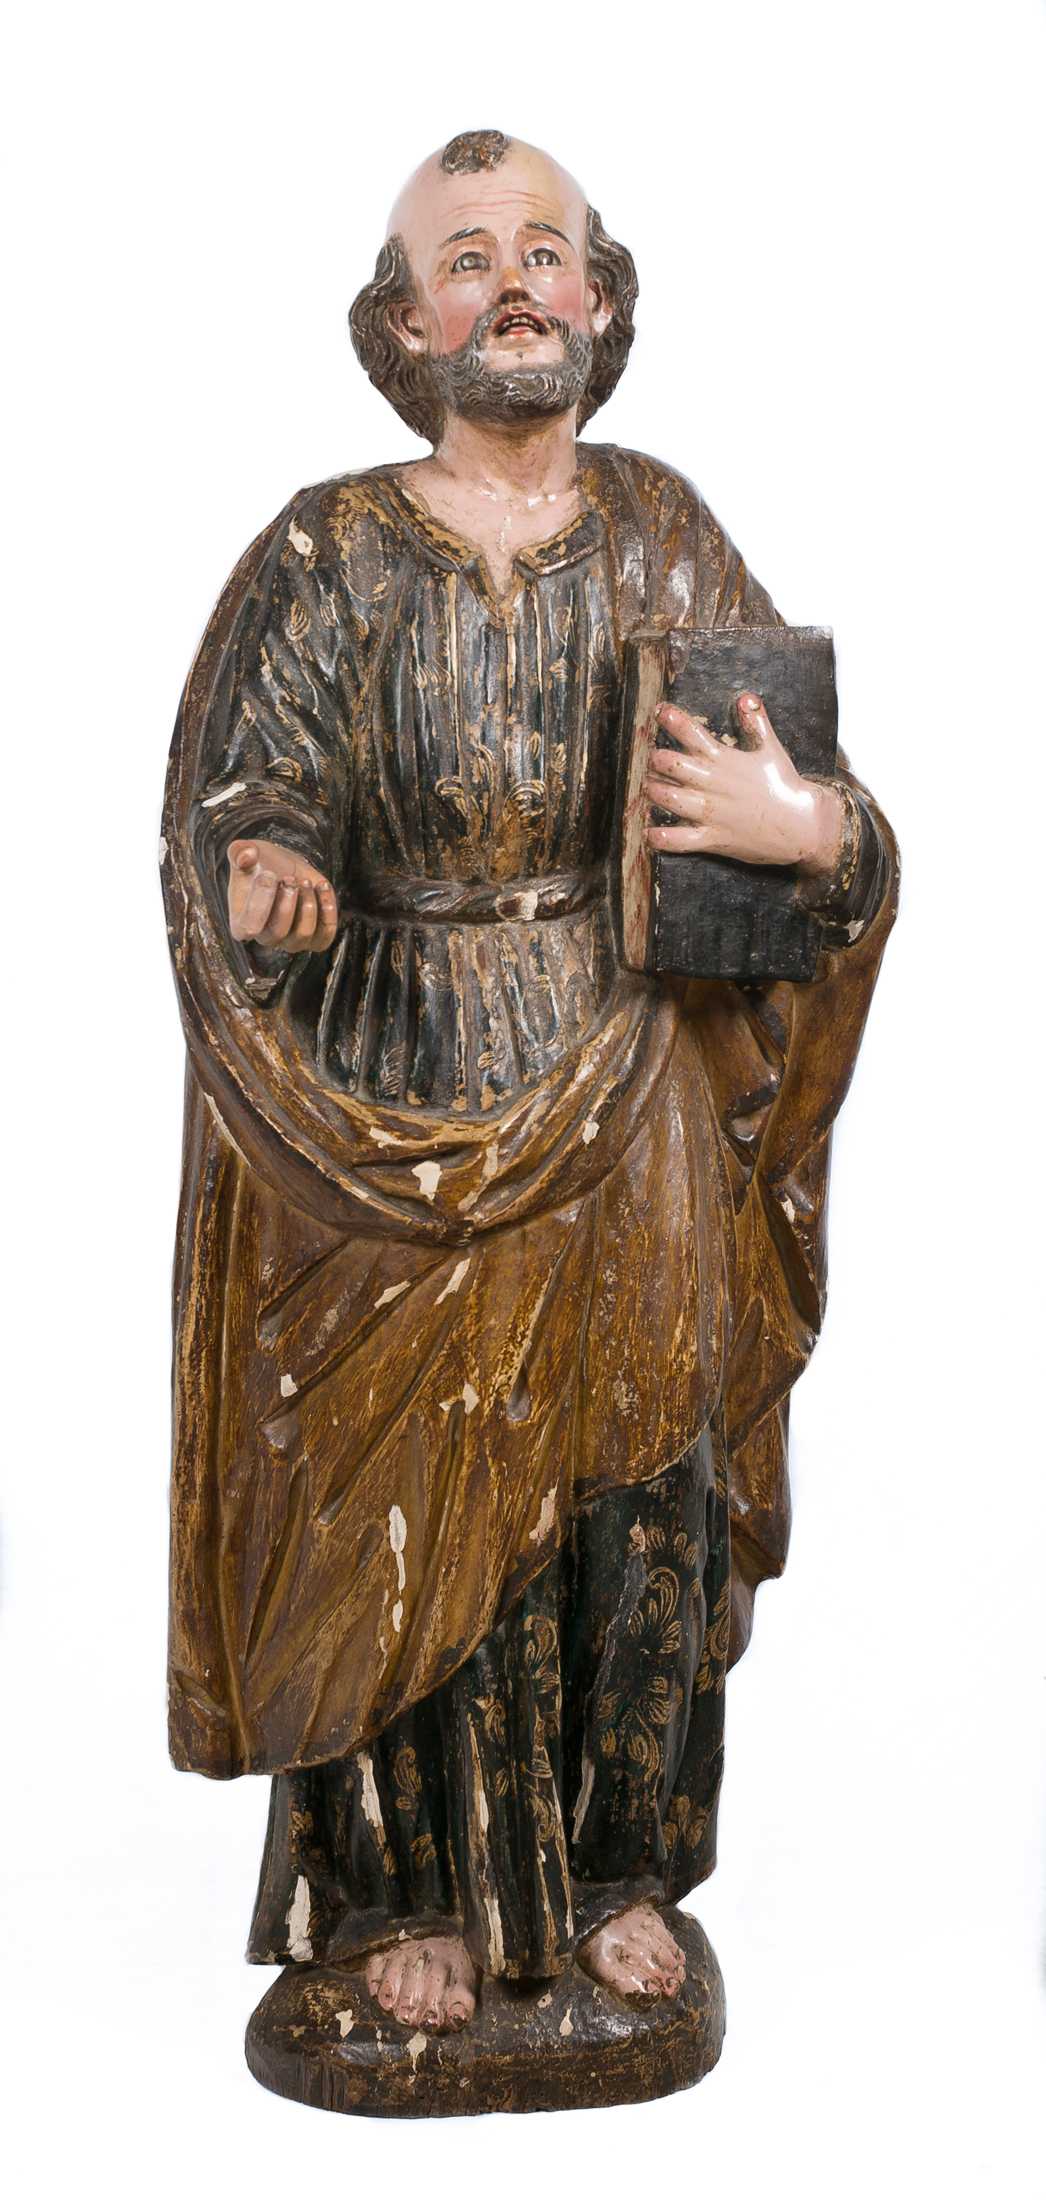 "Saint Peter". Carved, gilded and polychromed wooden sculpture with estofado technique and pierced